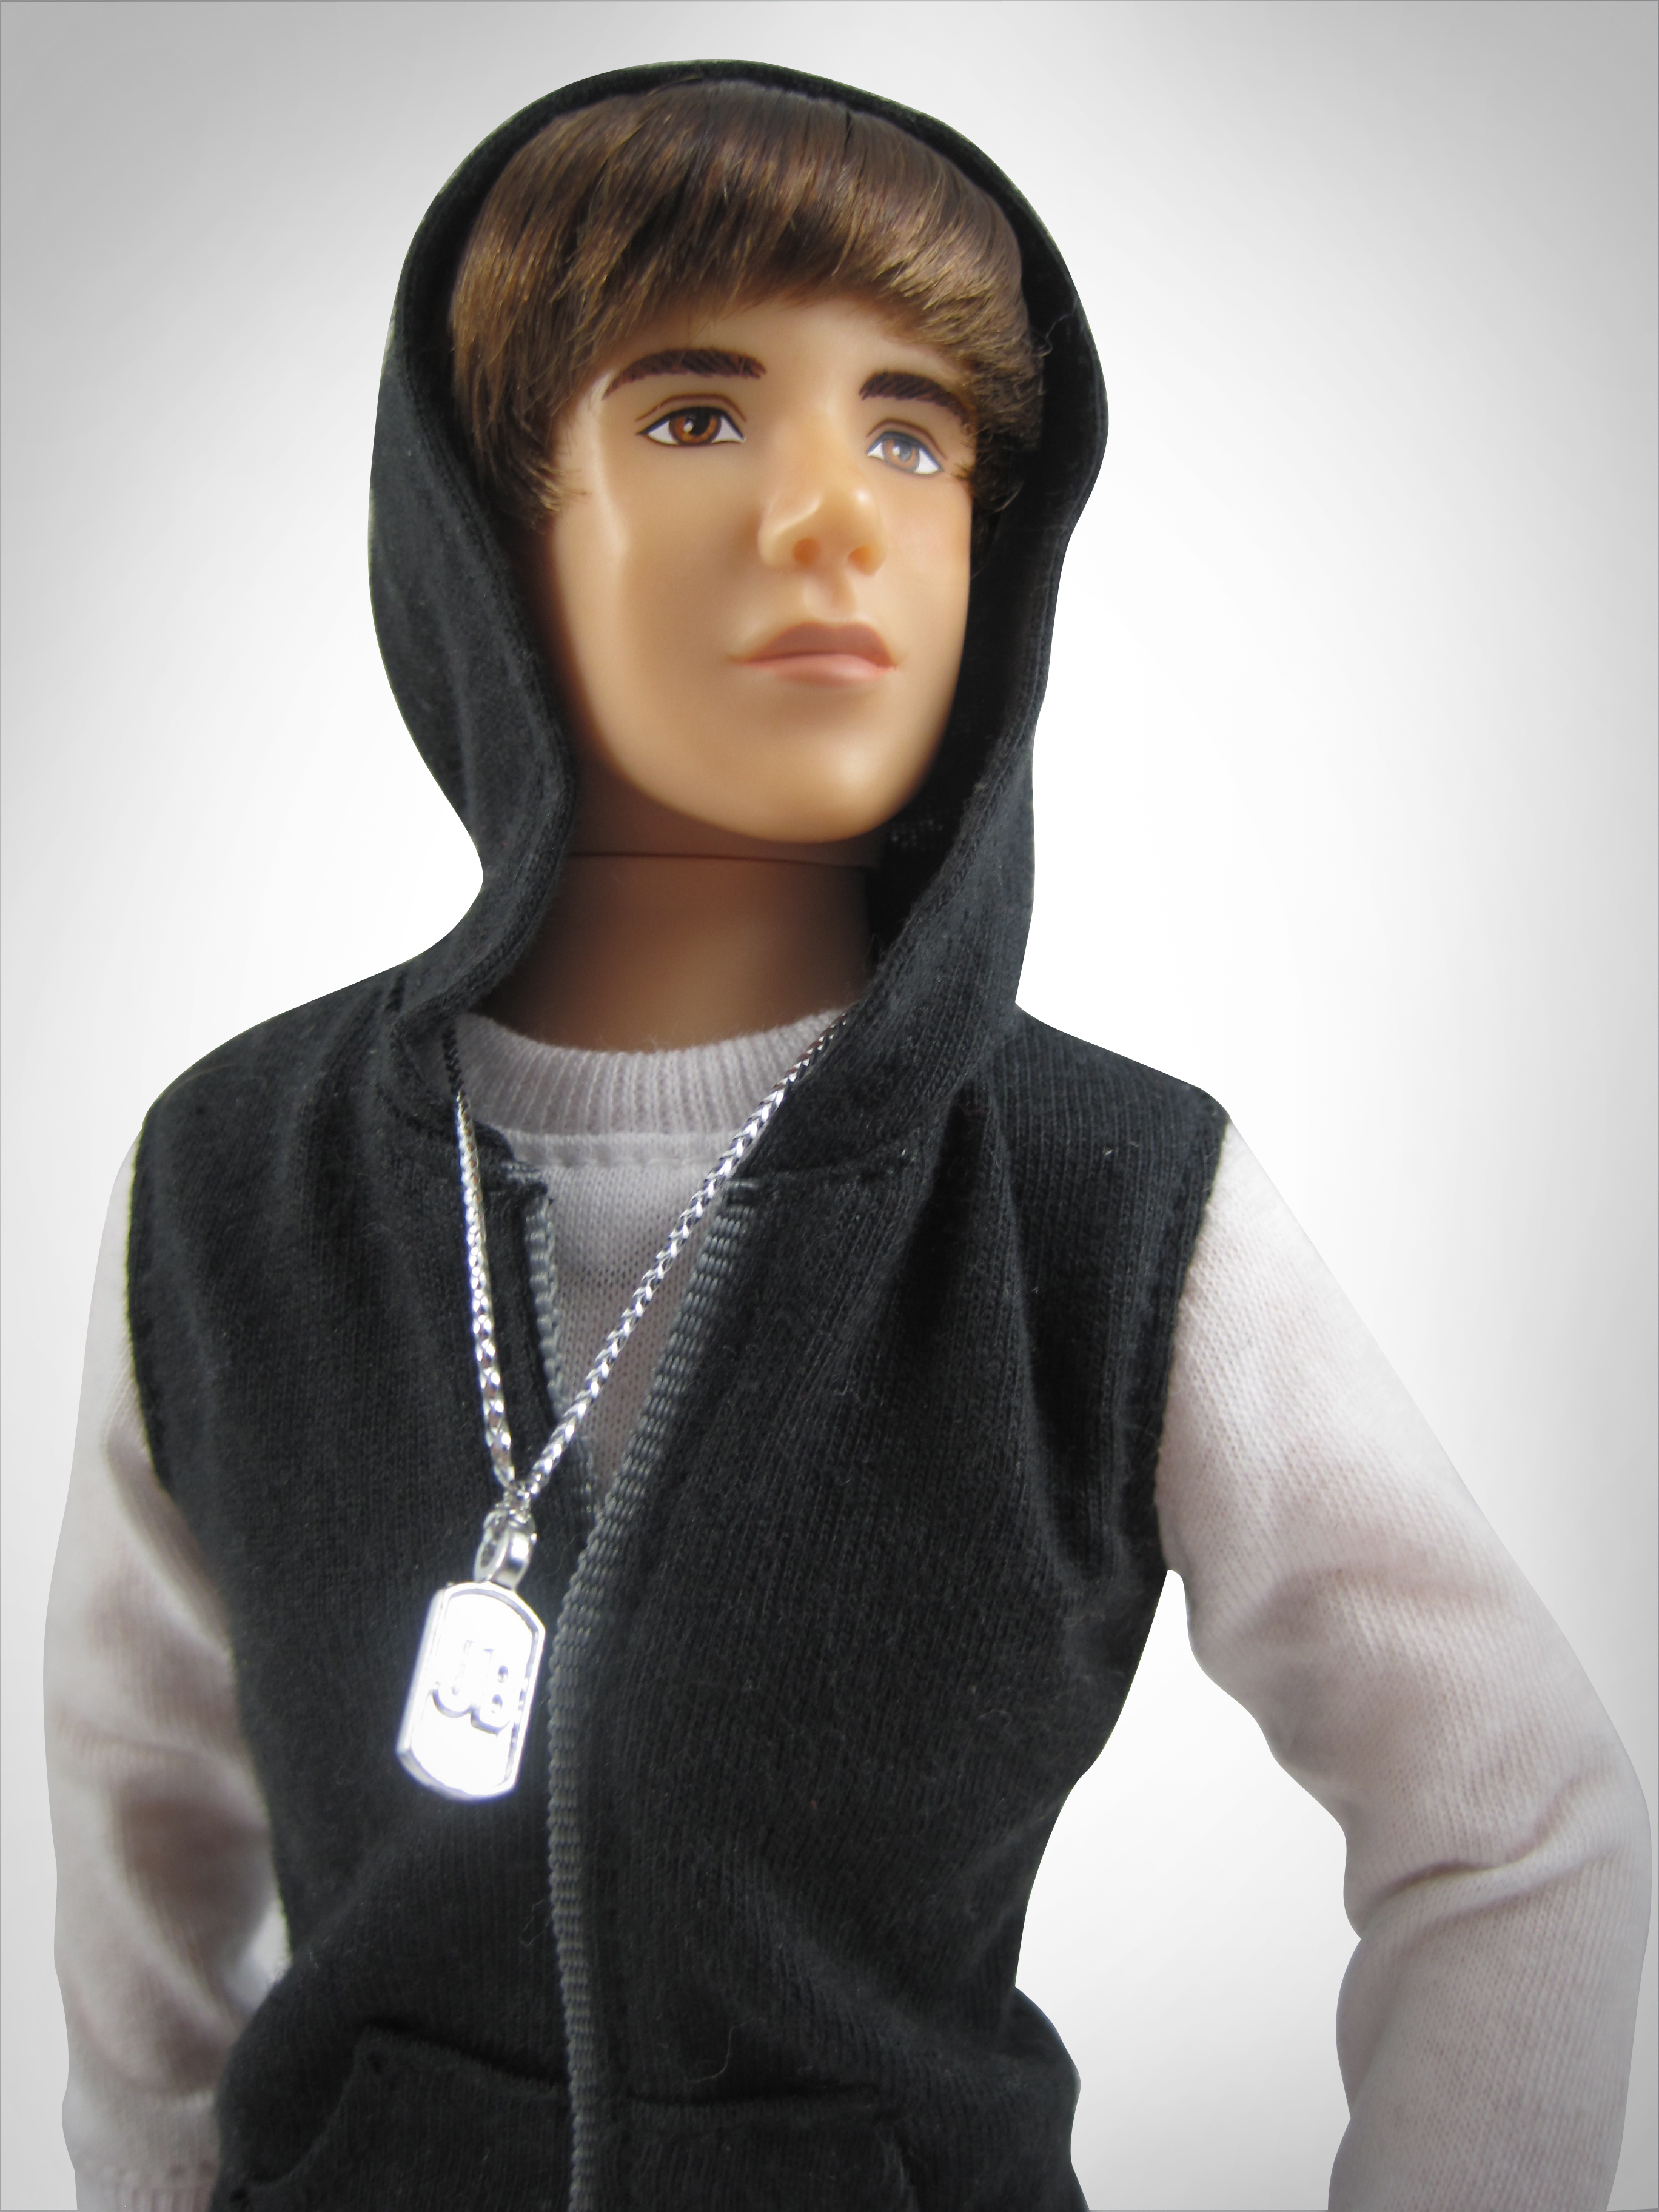 The 2011 Justin Bieber Toy Collection Unveiled at New York 